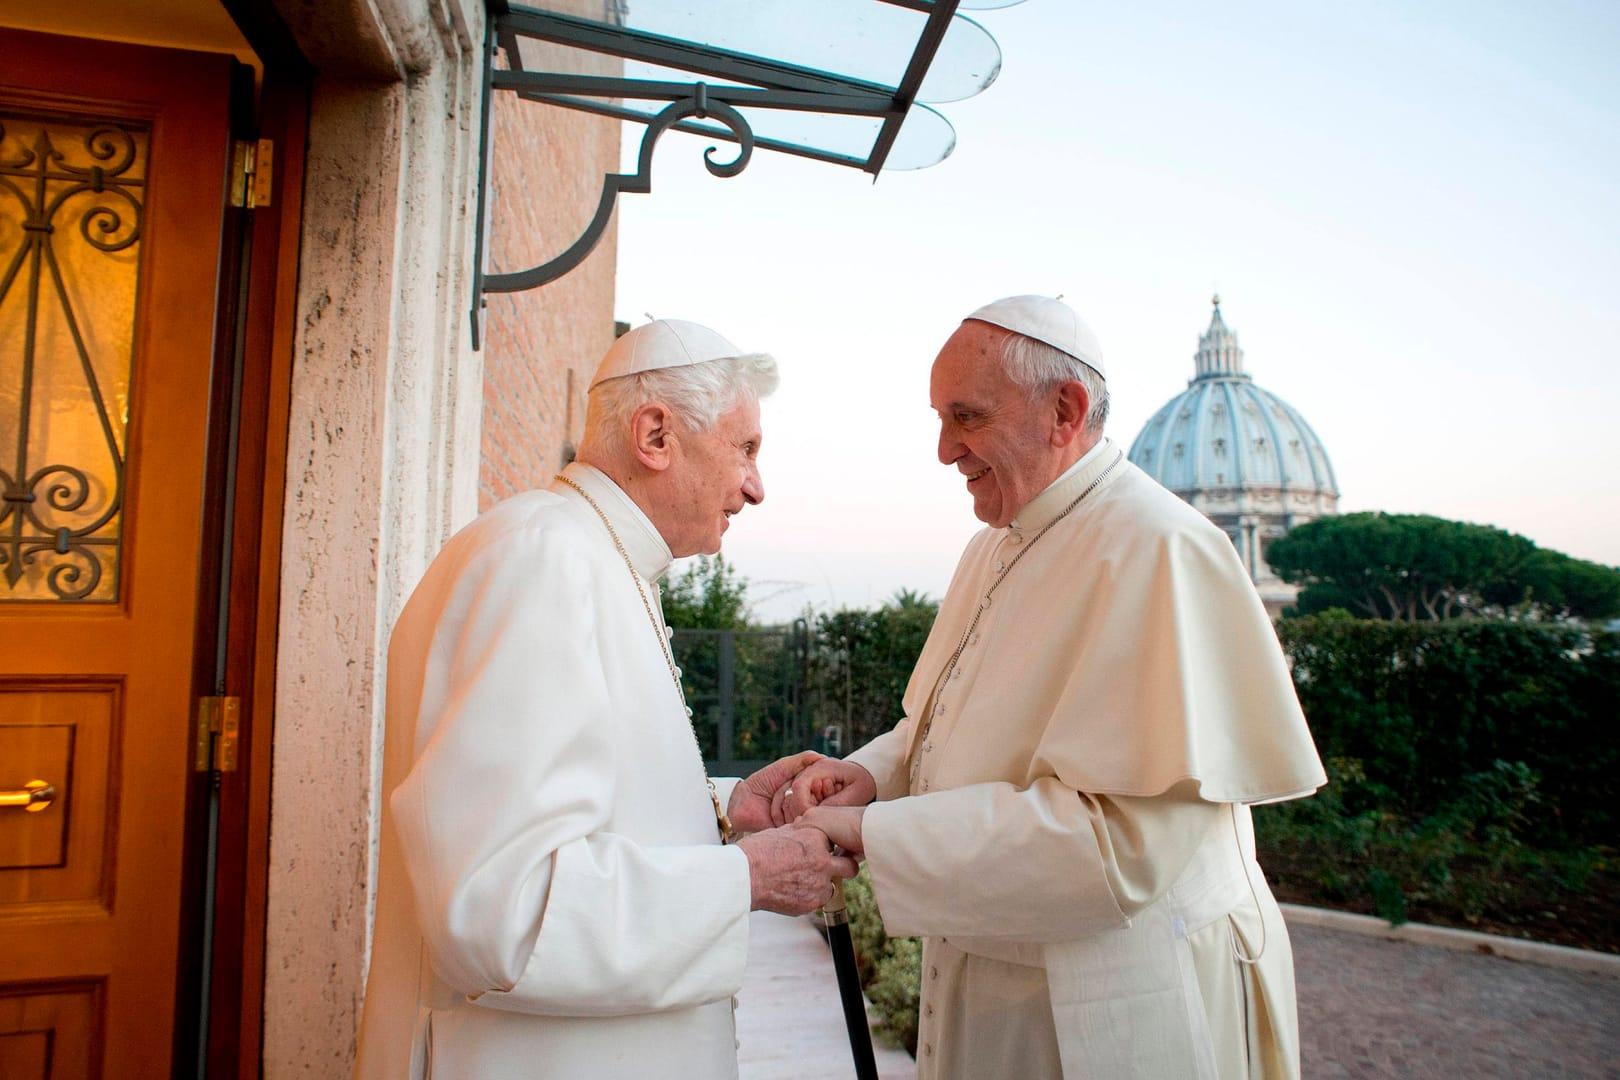 Continuity in particularity: Cardinal looks at Pope Francis, Benedict XVI